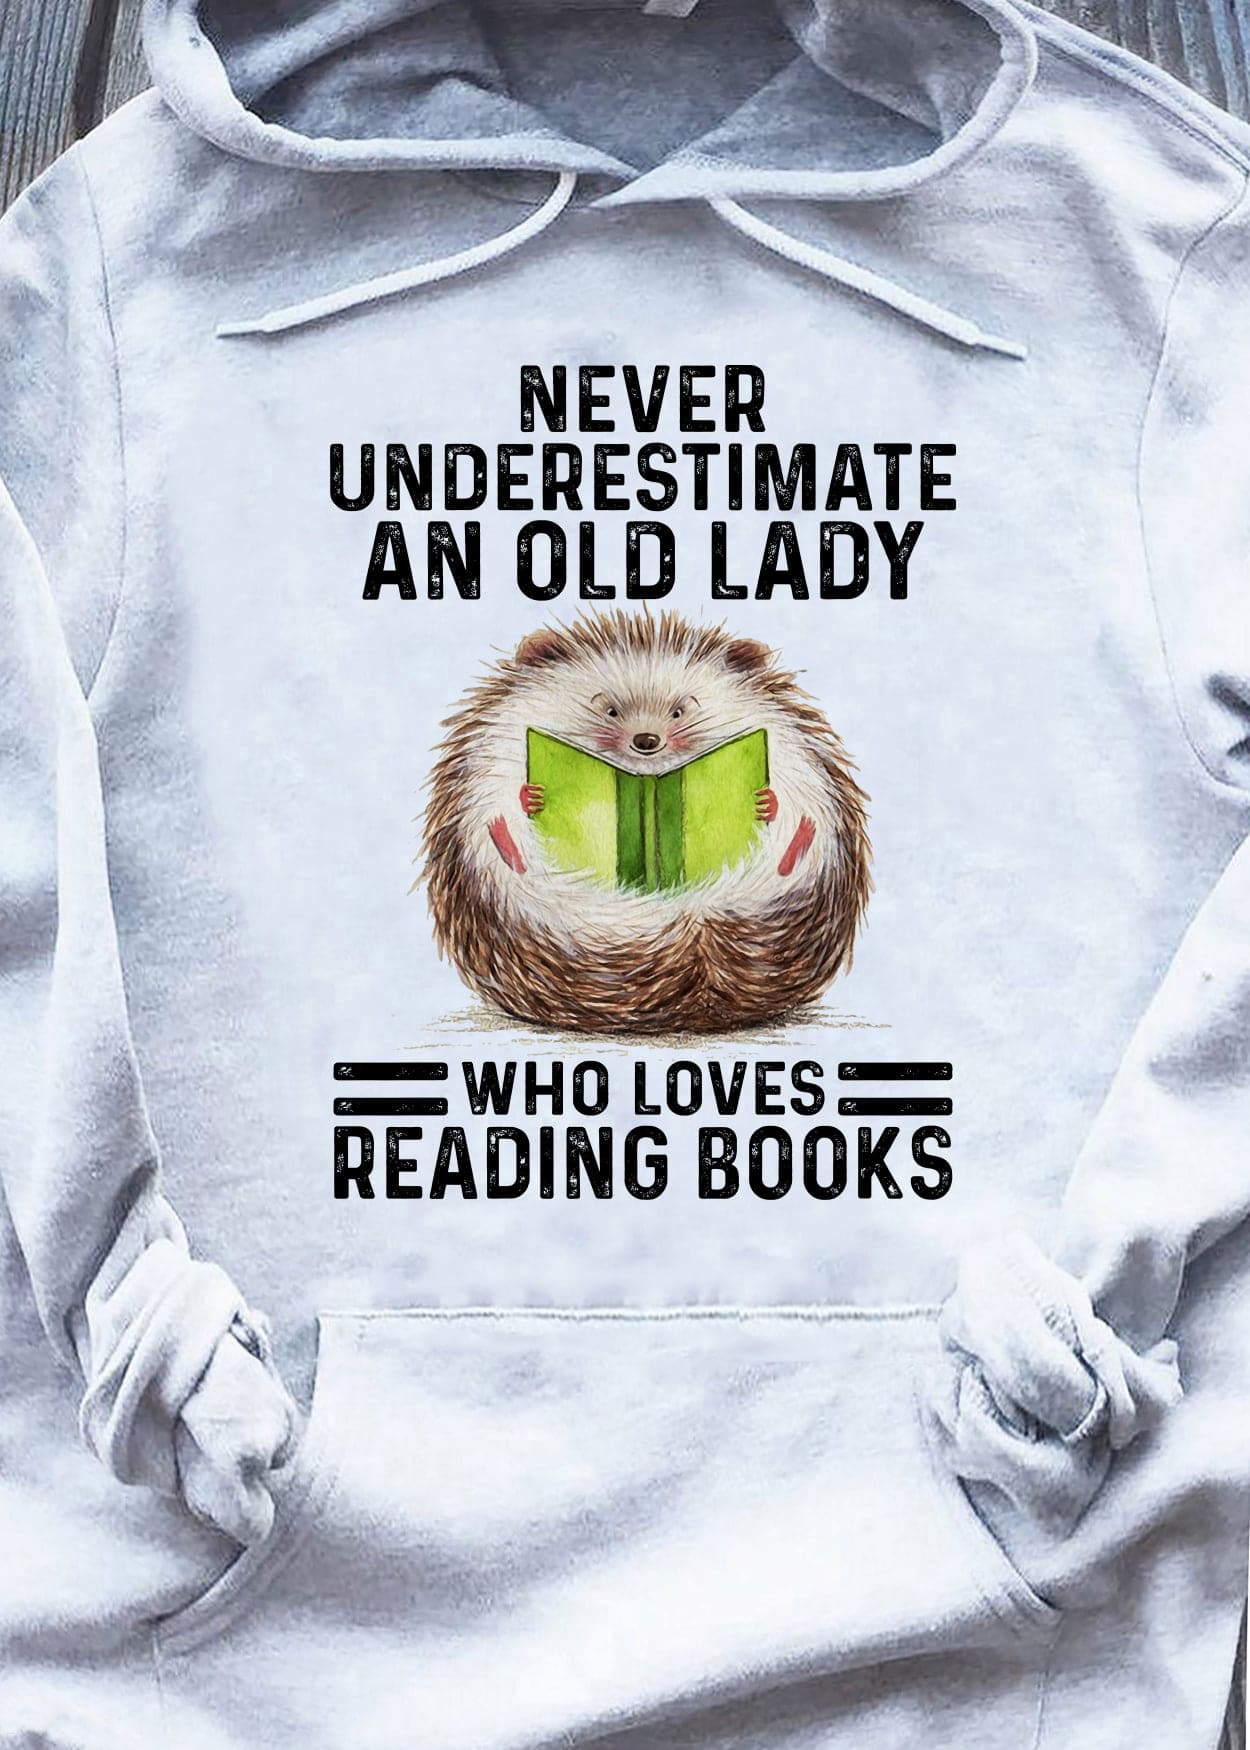 Never underestimate an old lady who loves reading books - Hedgehog reading book, gift for book lady